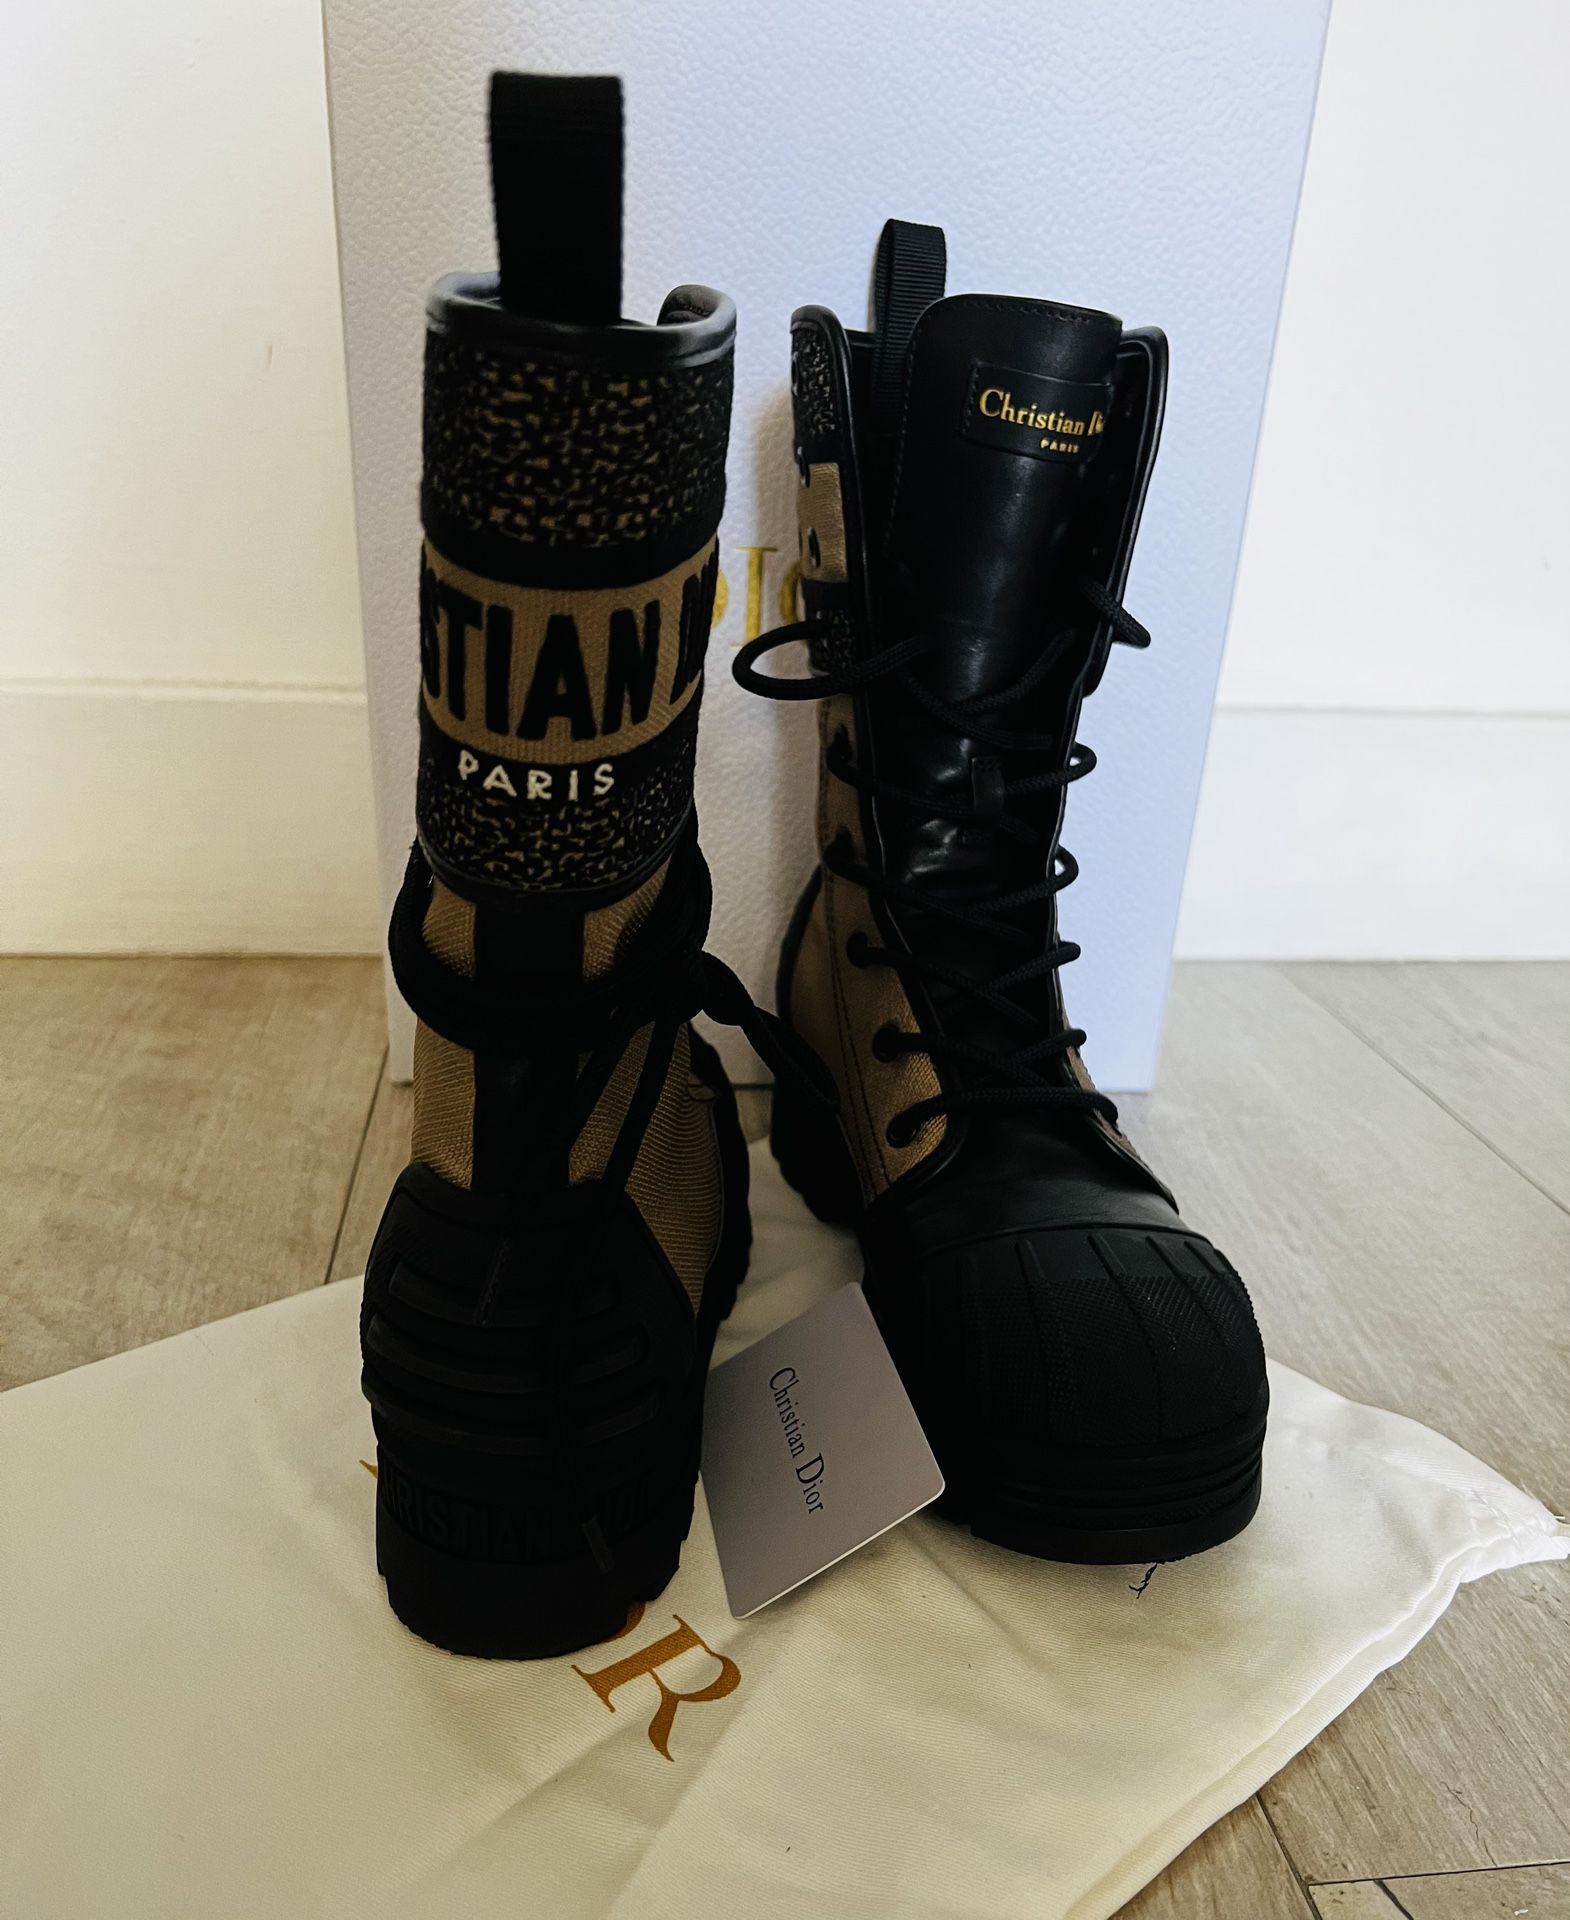 Dior Women's D-major Canvas & Rubber Boot Size 38 for Sale in Sunny Isles  Beach, FL - OfferUp